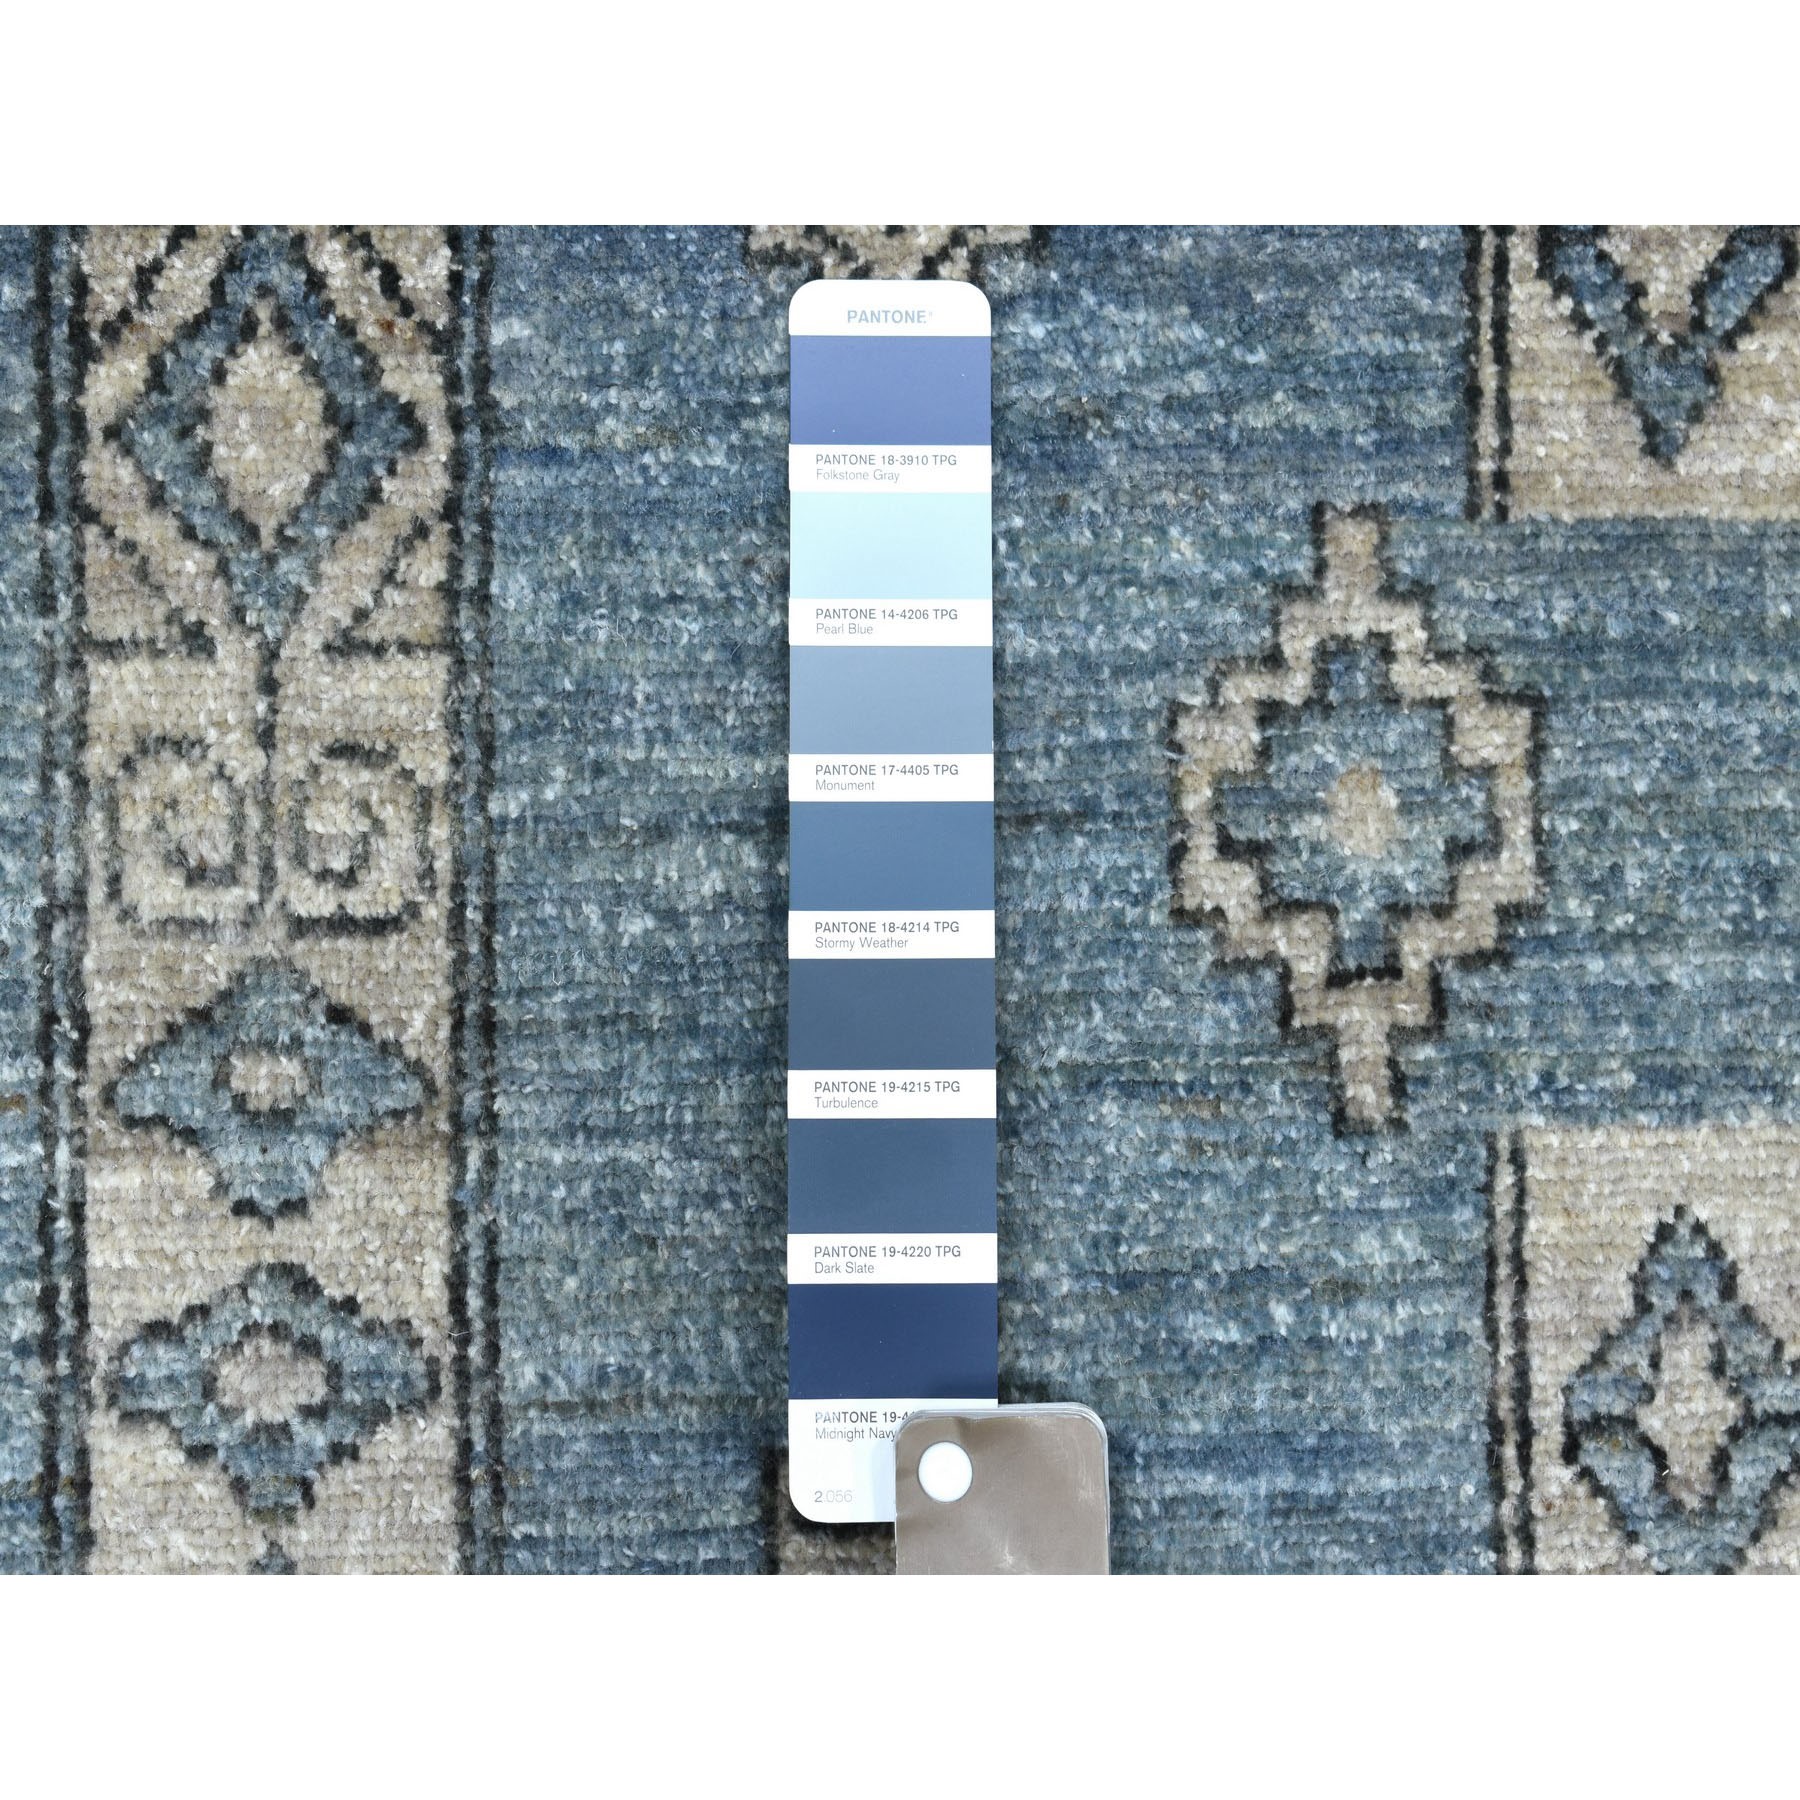 10-1 x13-10  Blue Peshawar With Berber Motifs Design Pure Wool Hand-Knotted Oriental Rug 